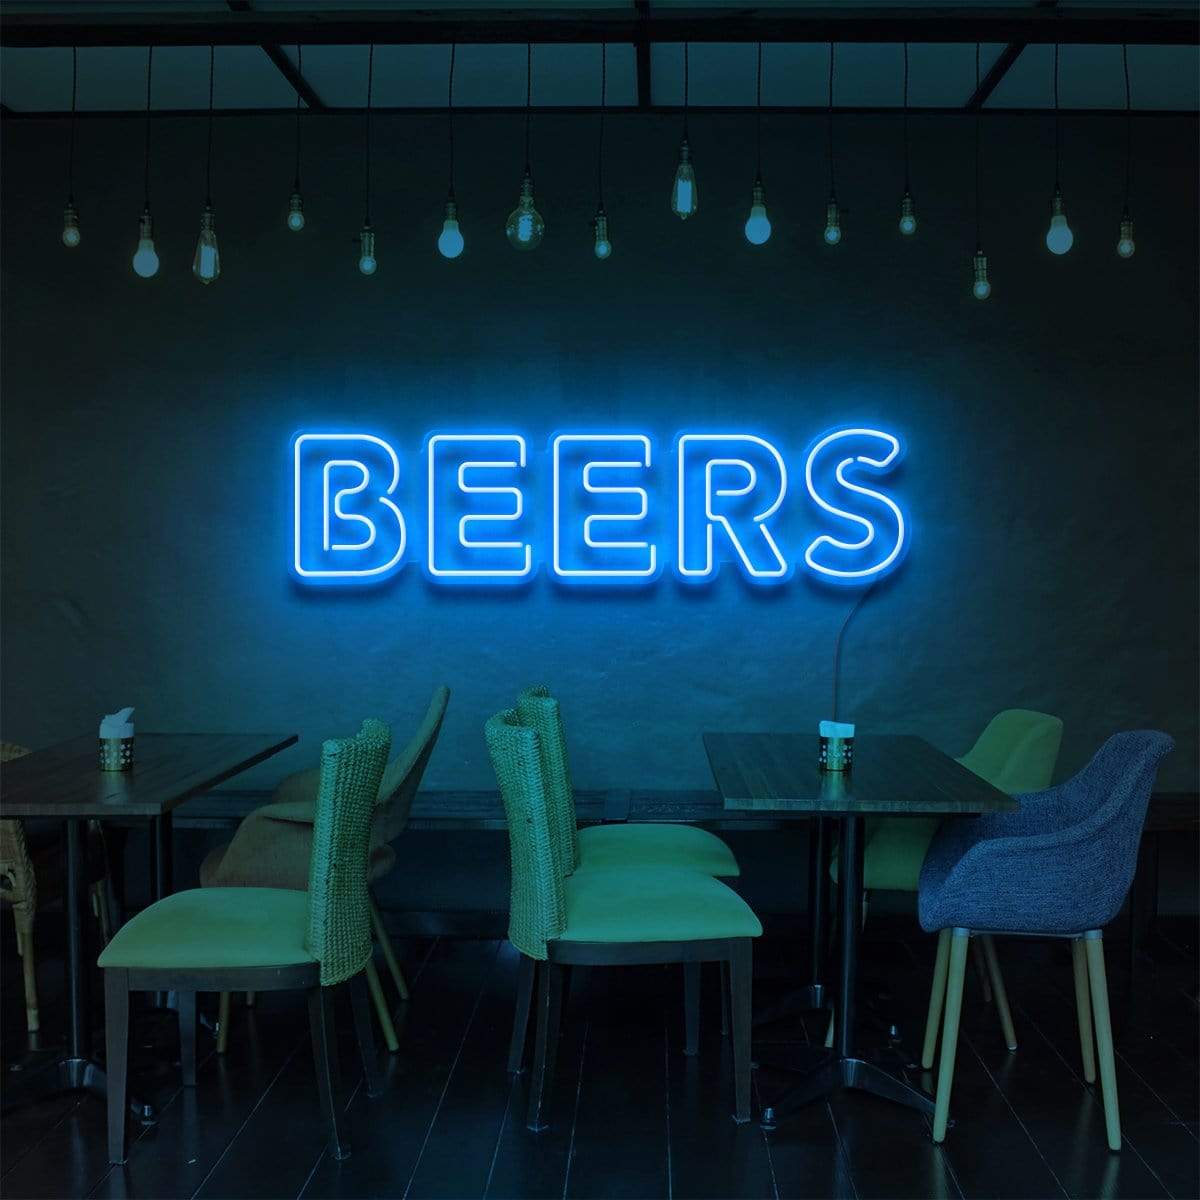 "Beers" Neon Sign for Bars & Restaurants 60cm (2ft) / Ice Blue / LED Neon by Neon Icons